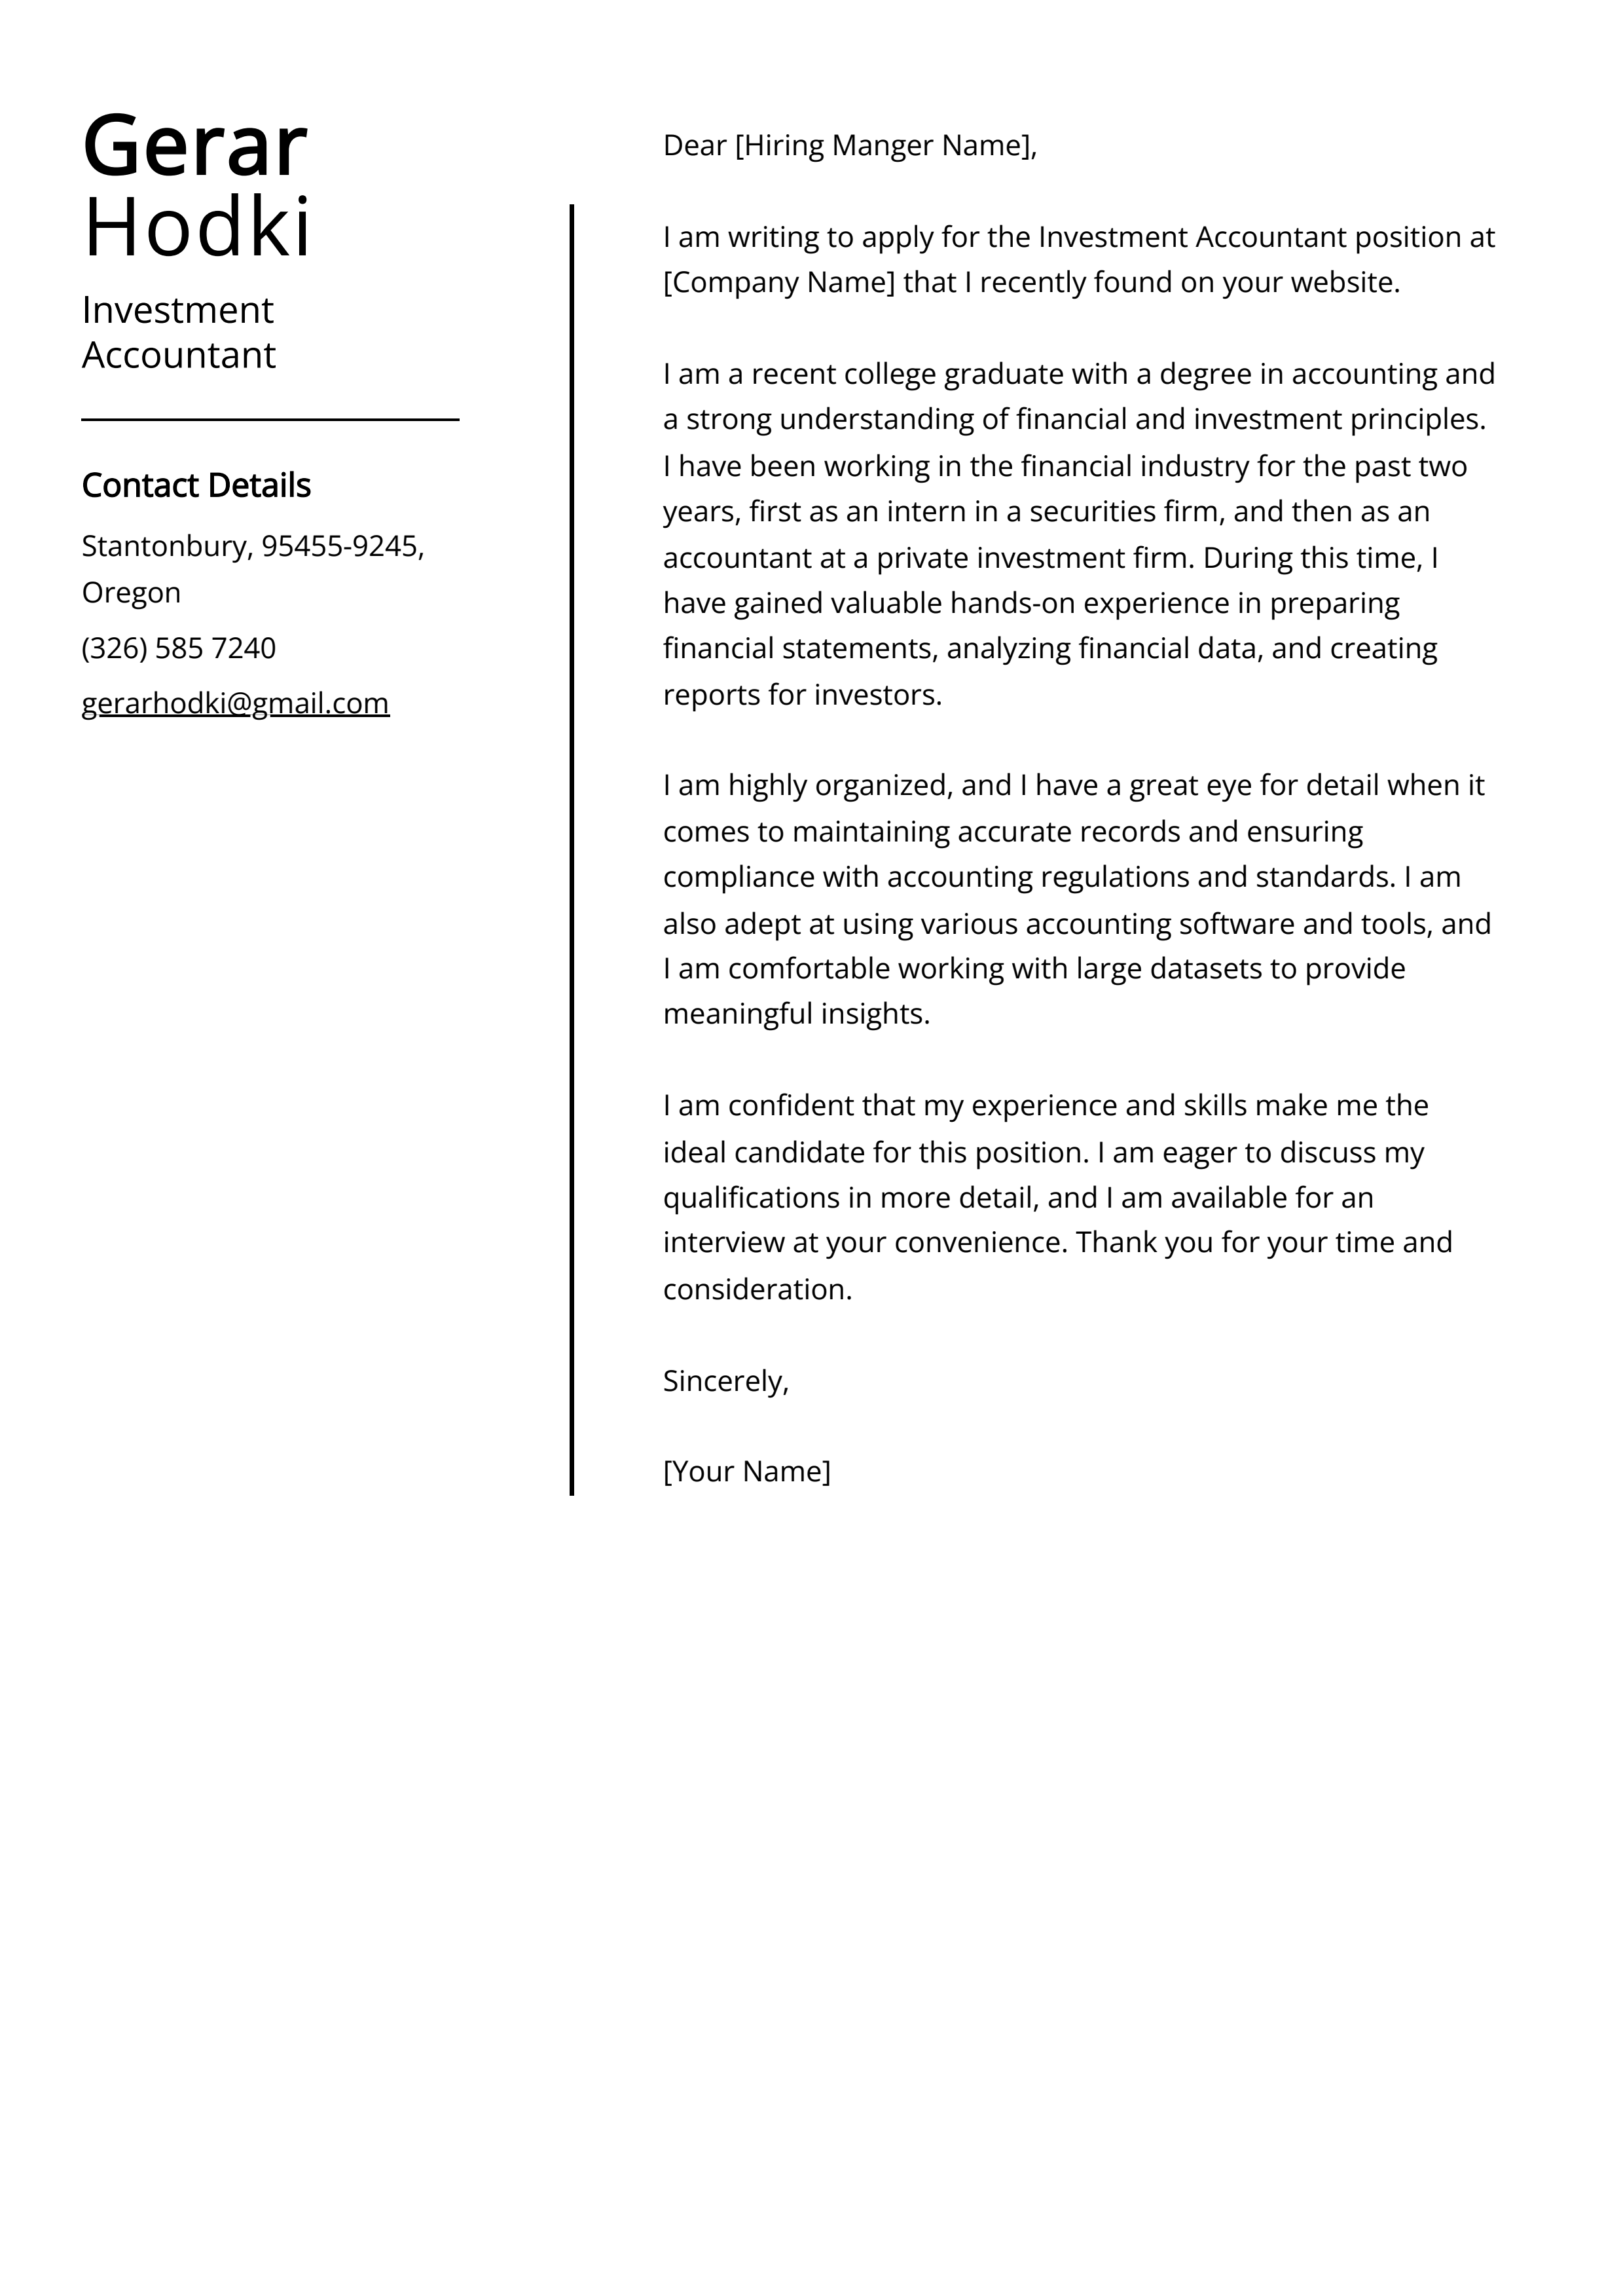 Investment Accountant Cover Letter Example